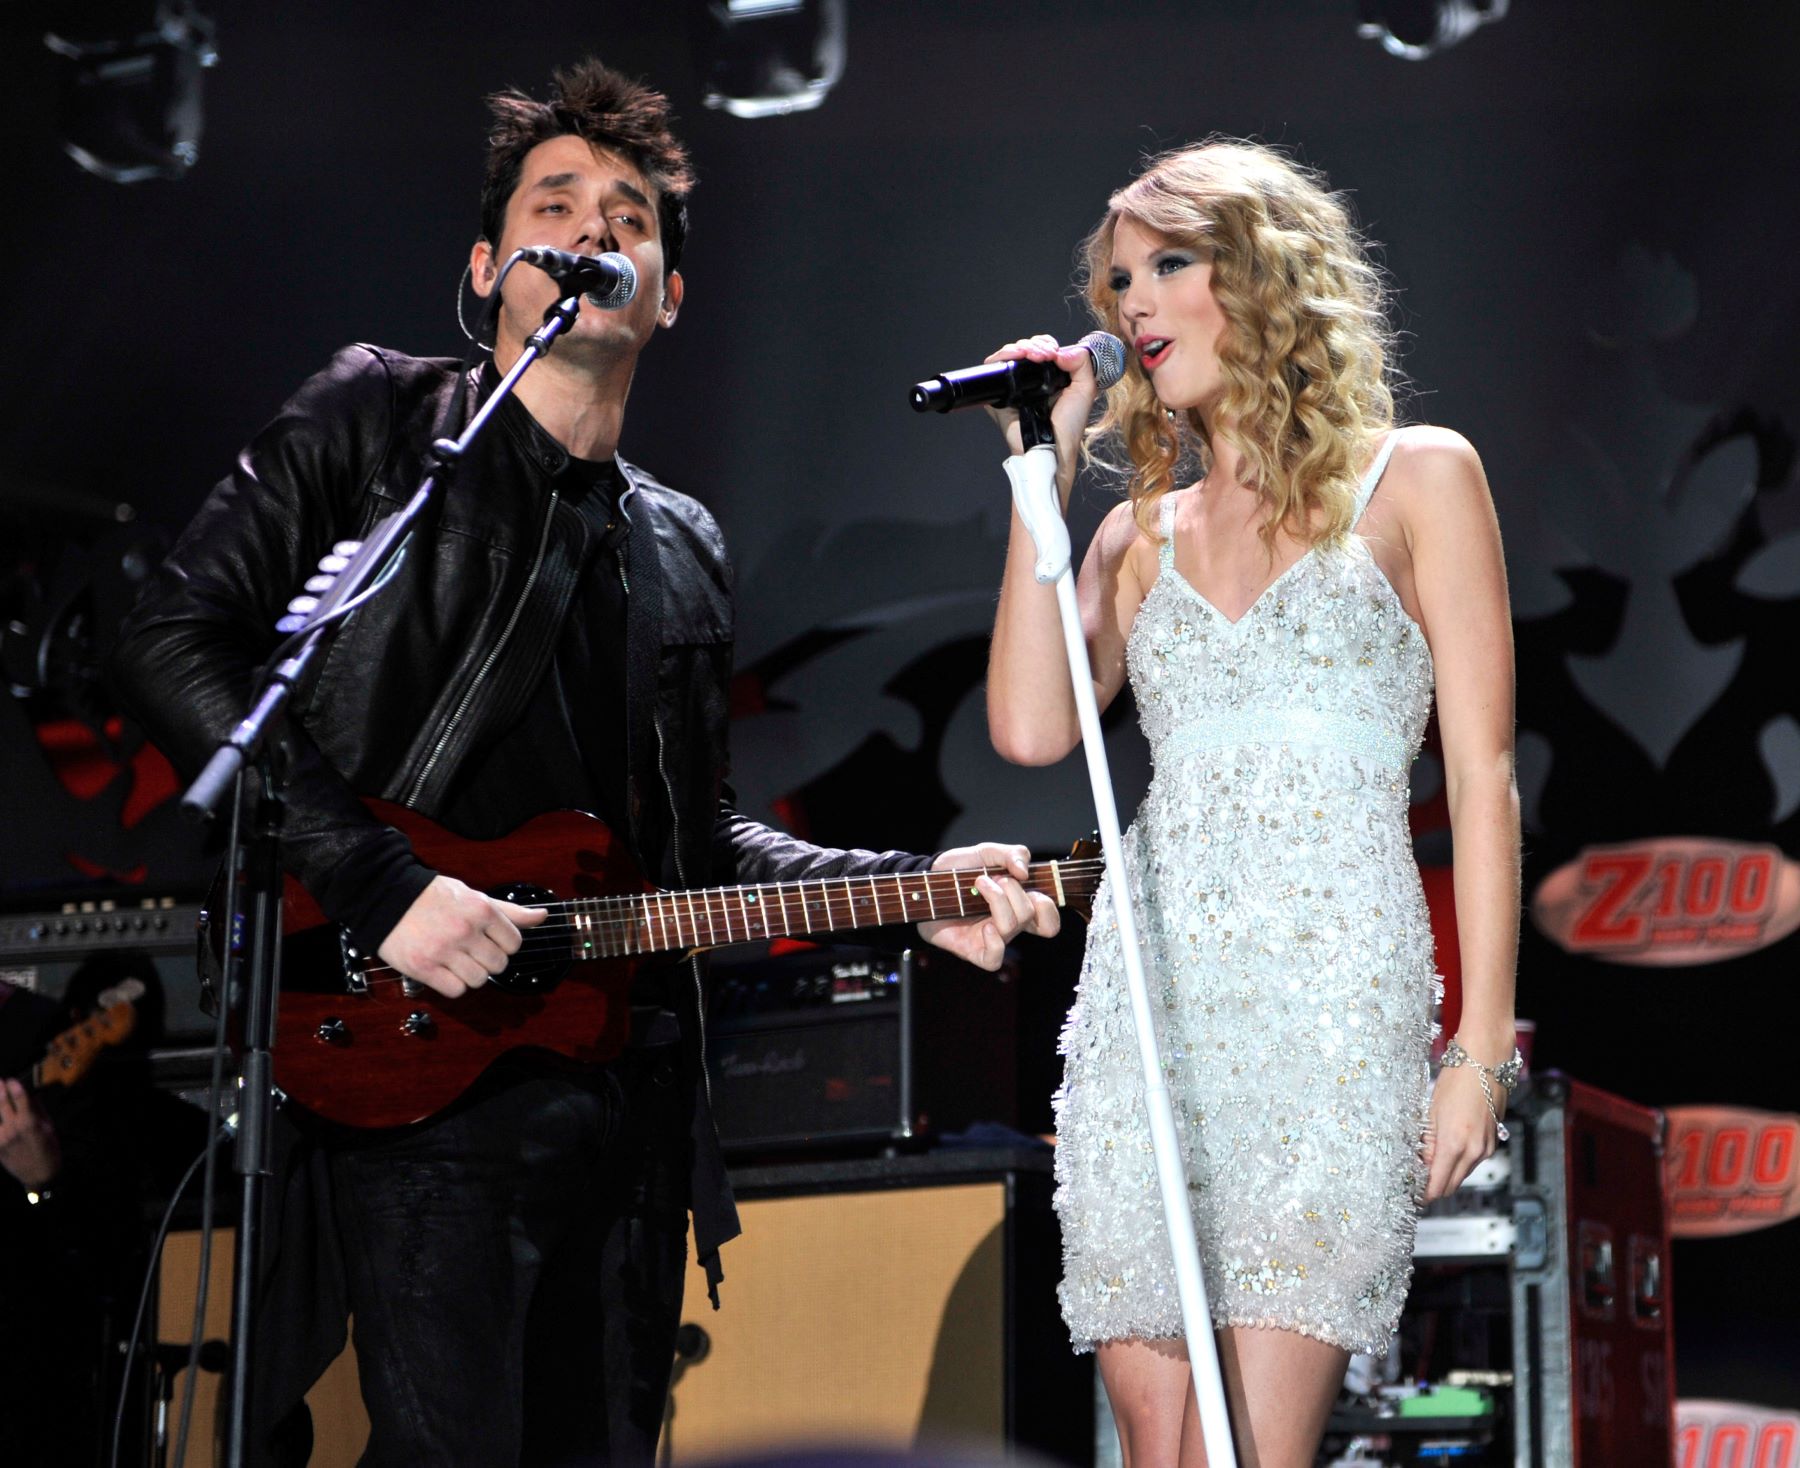 John Mayer and Taylor Swift performs onstage during Z100's Jingle Ball 2009